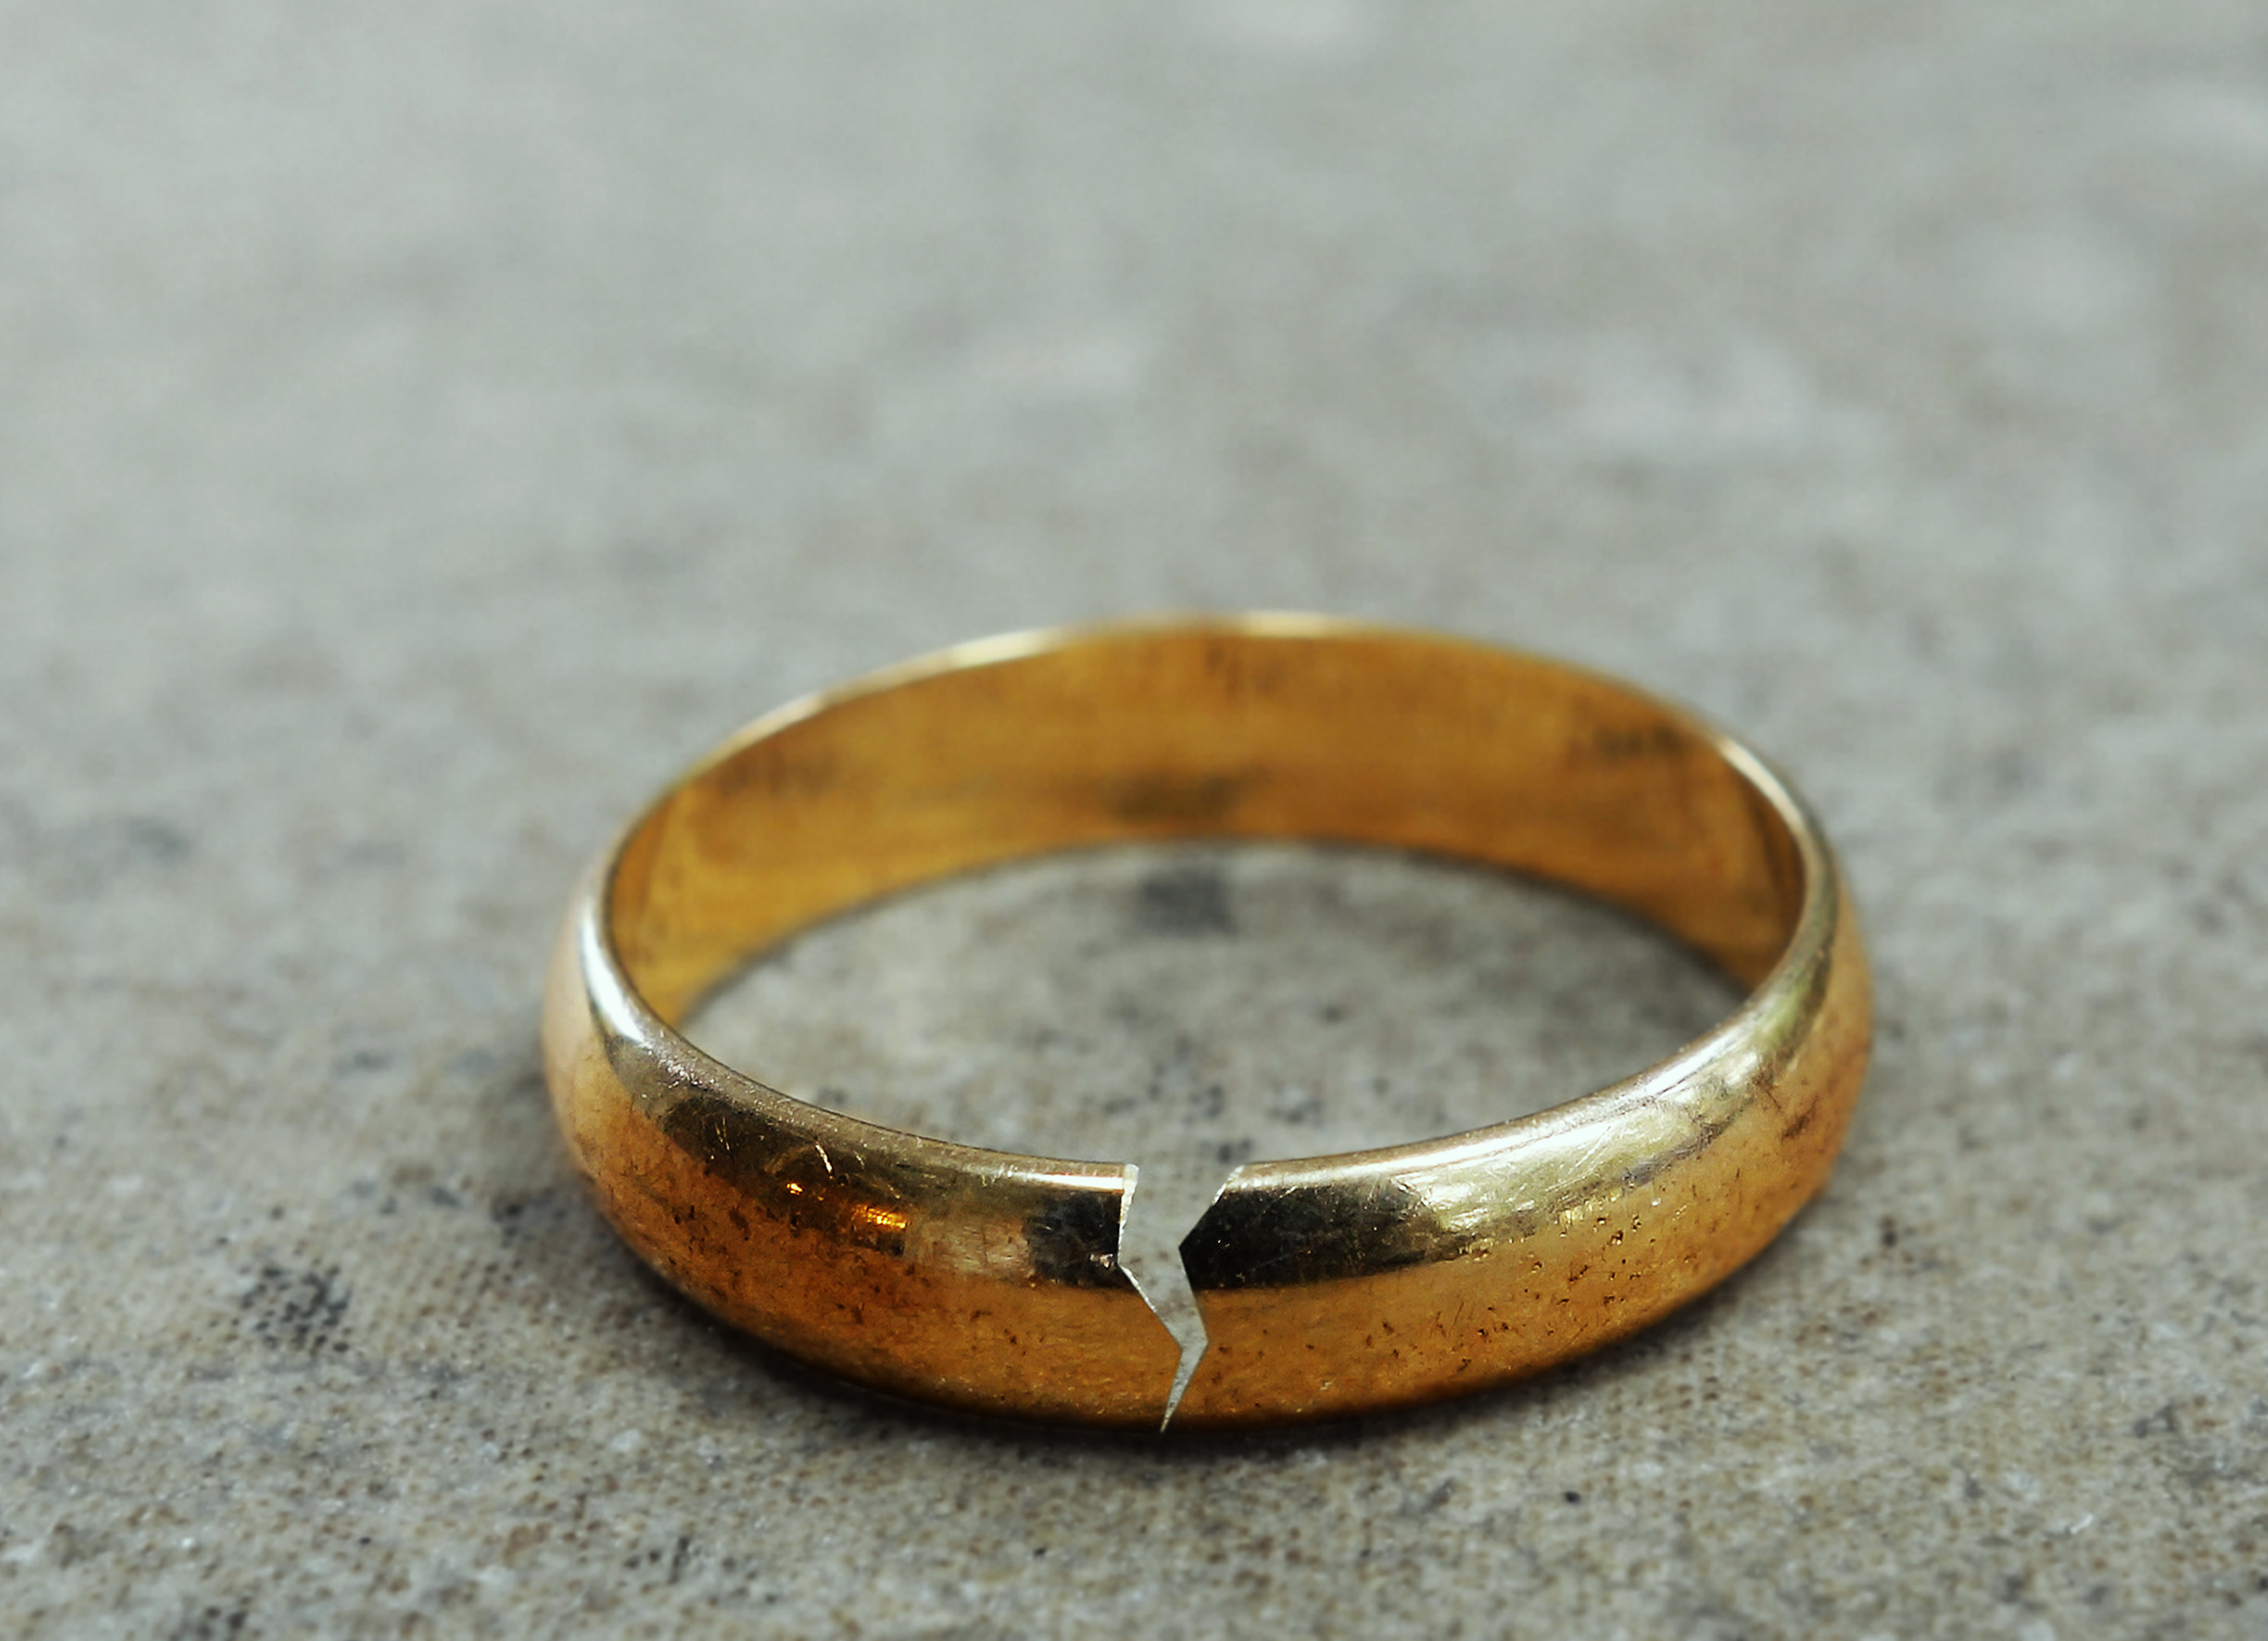 A cracked wedding ring | Source: Shutterstock